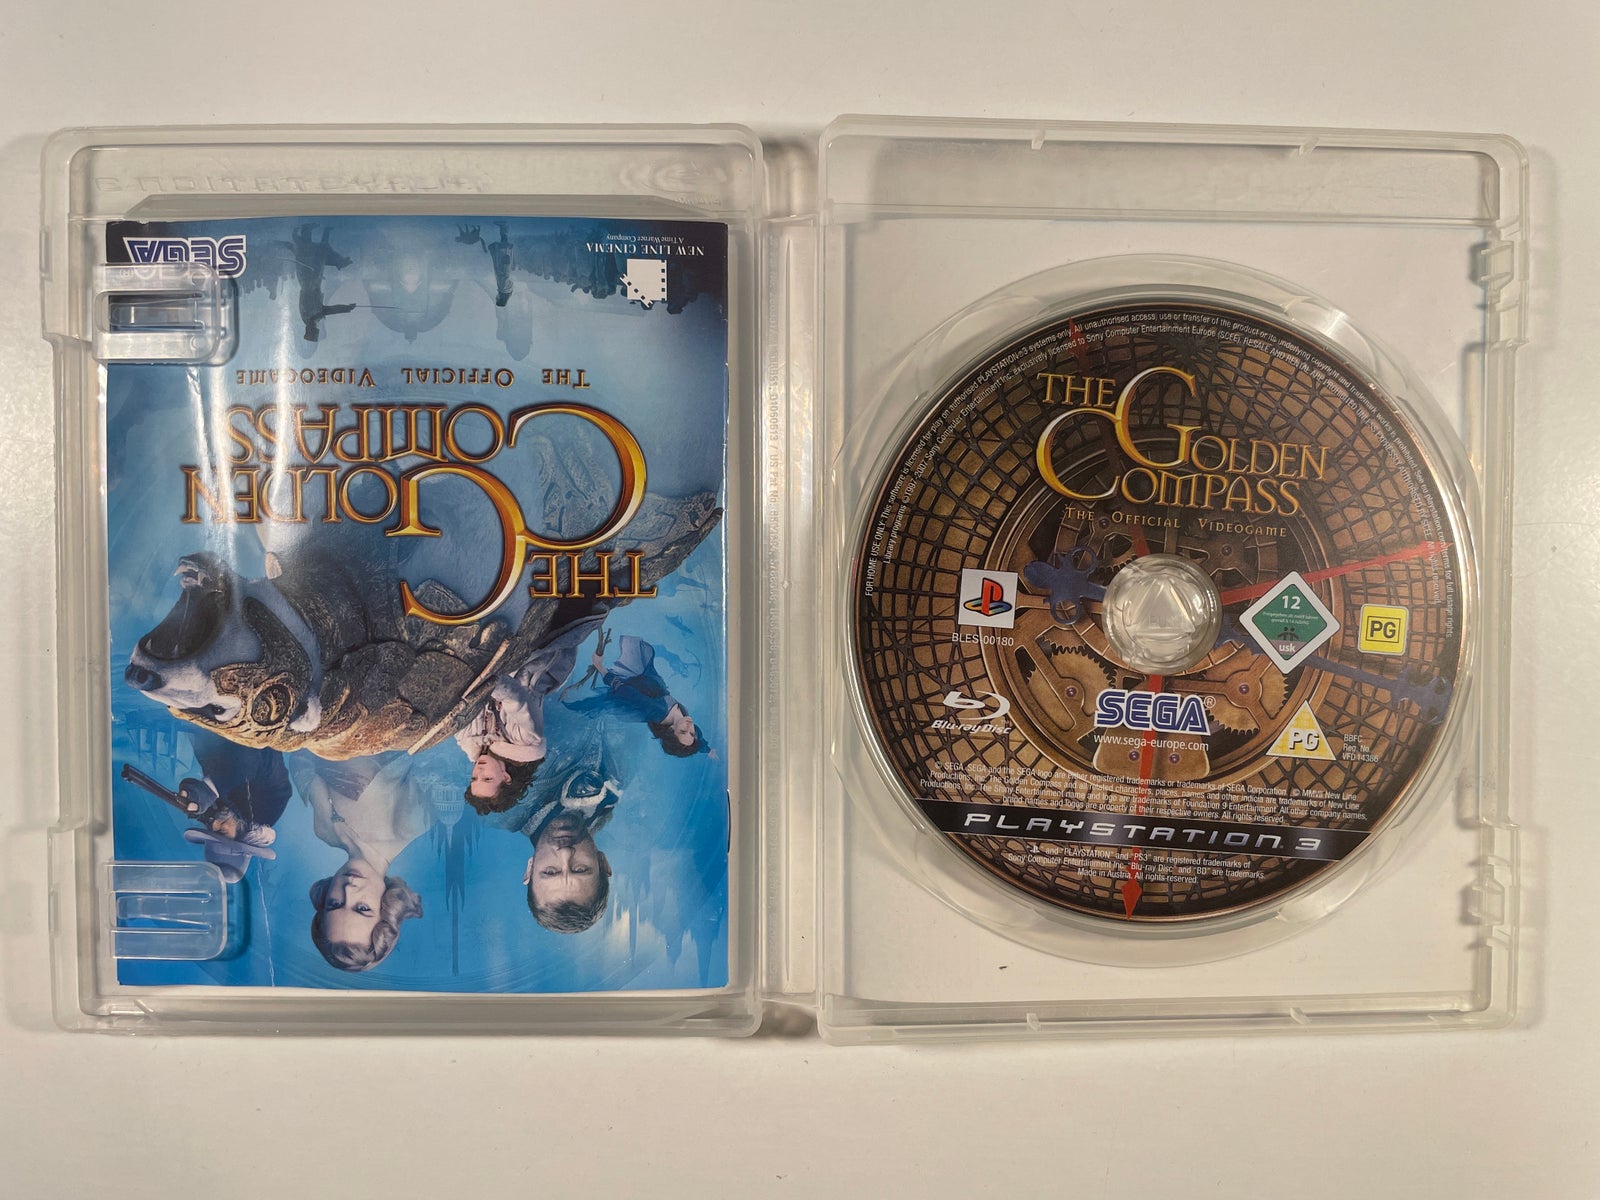 The Golden Compass, PS3